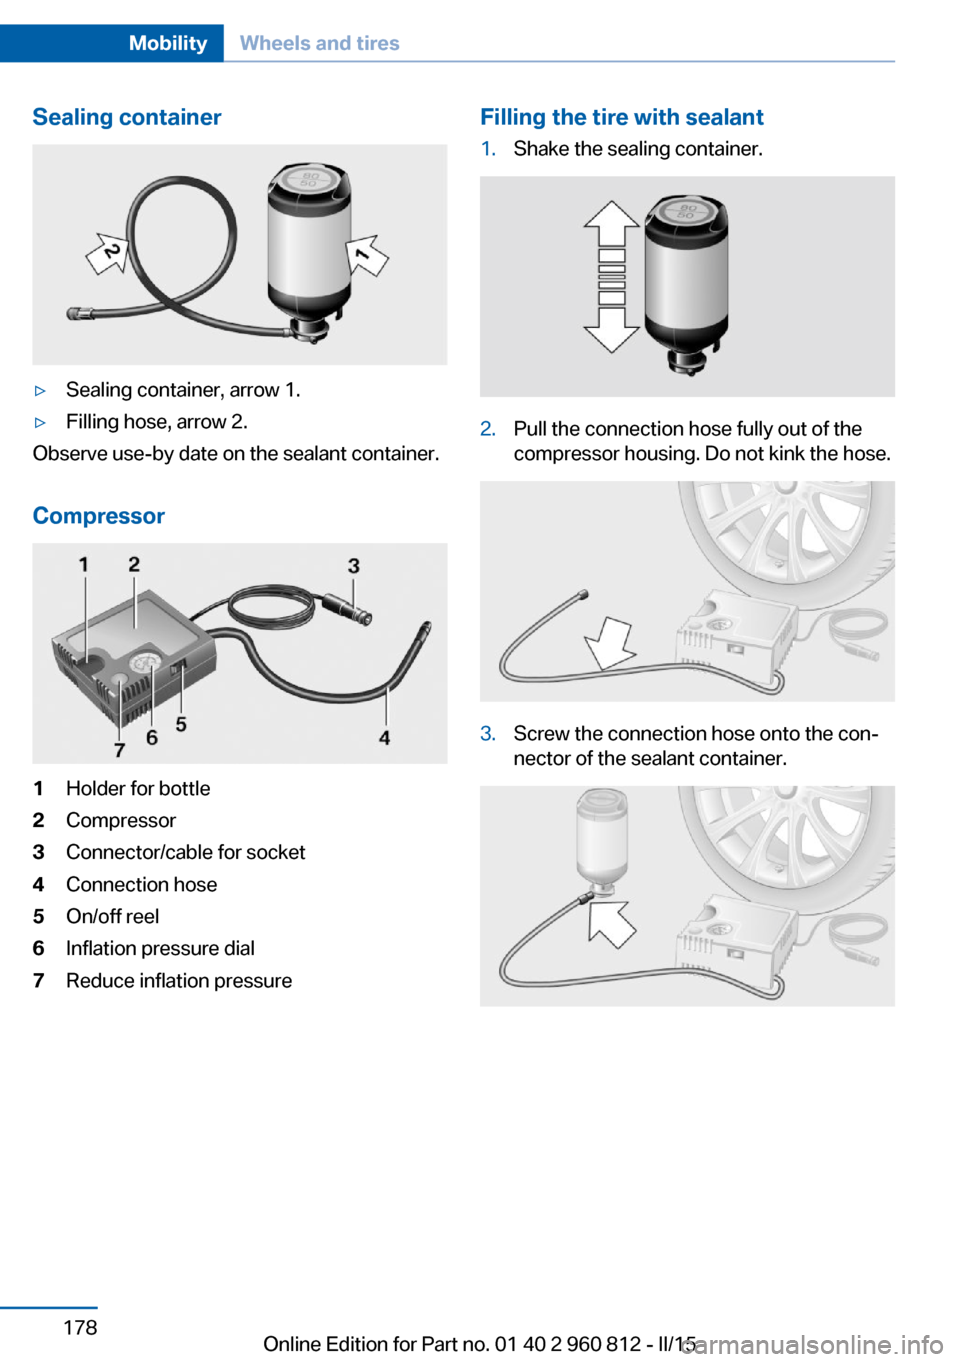 BMW M4 CONVERTIBLE 2016 F83 User Guide Sealing container▷Sealing container, arrow 1.▷Filling hose, arrow 2.
Observe use-by date on the sealant container.
Compressor
1Holder for bottle2Compressor3Connector/cable for socket4Connection ho